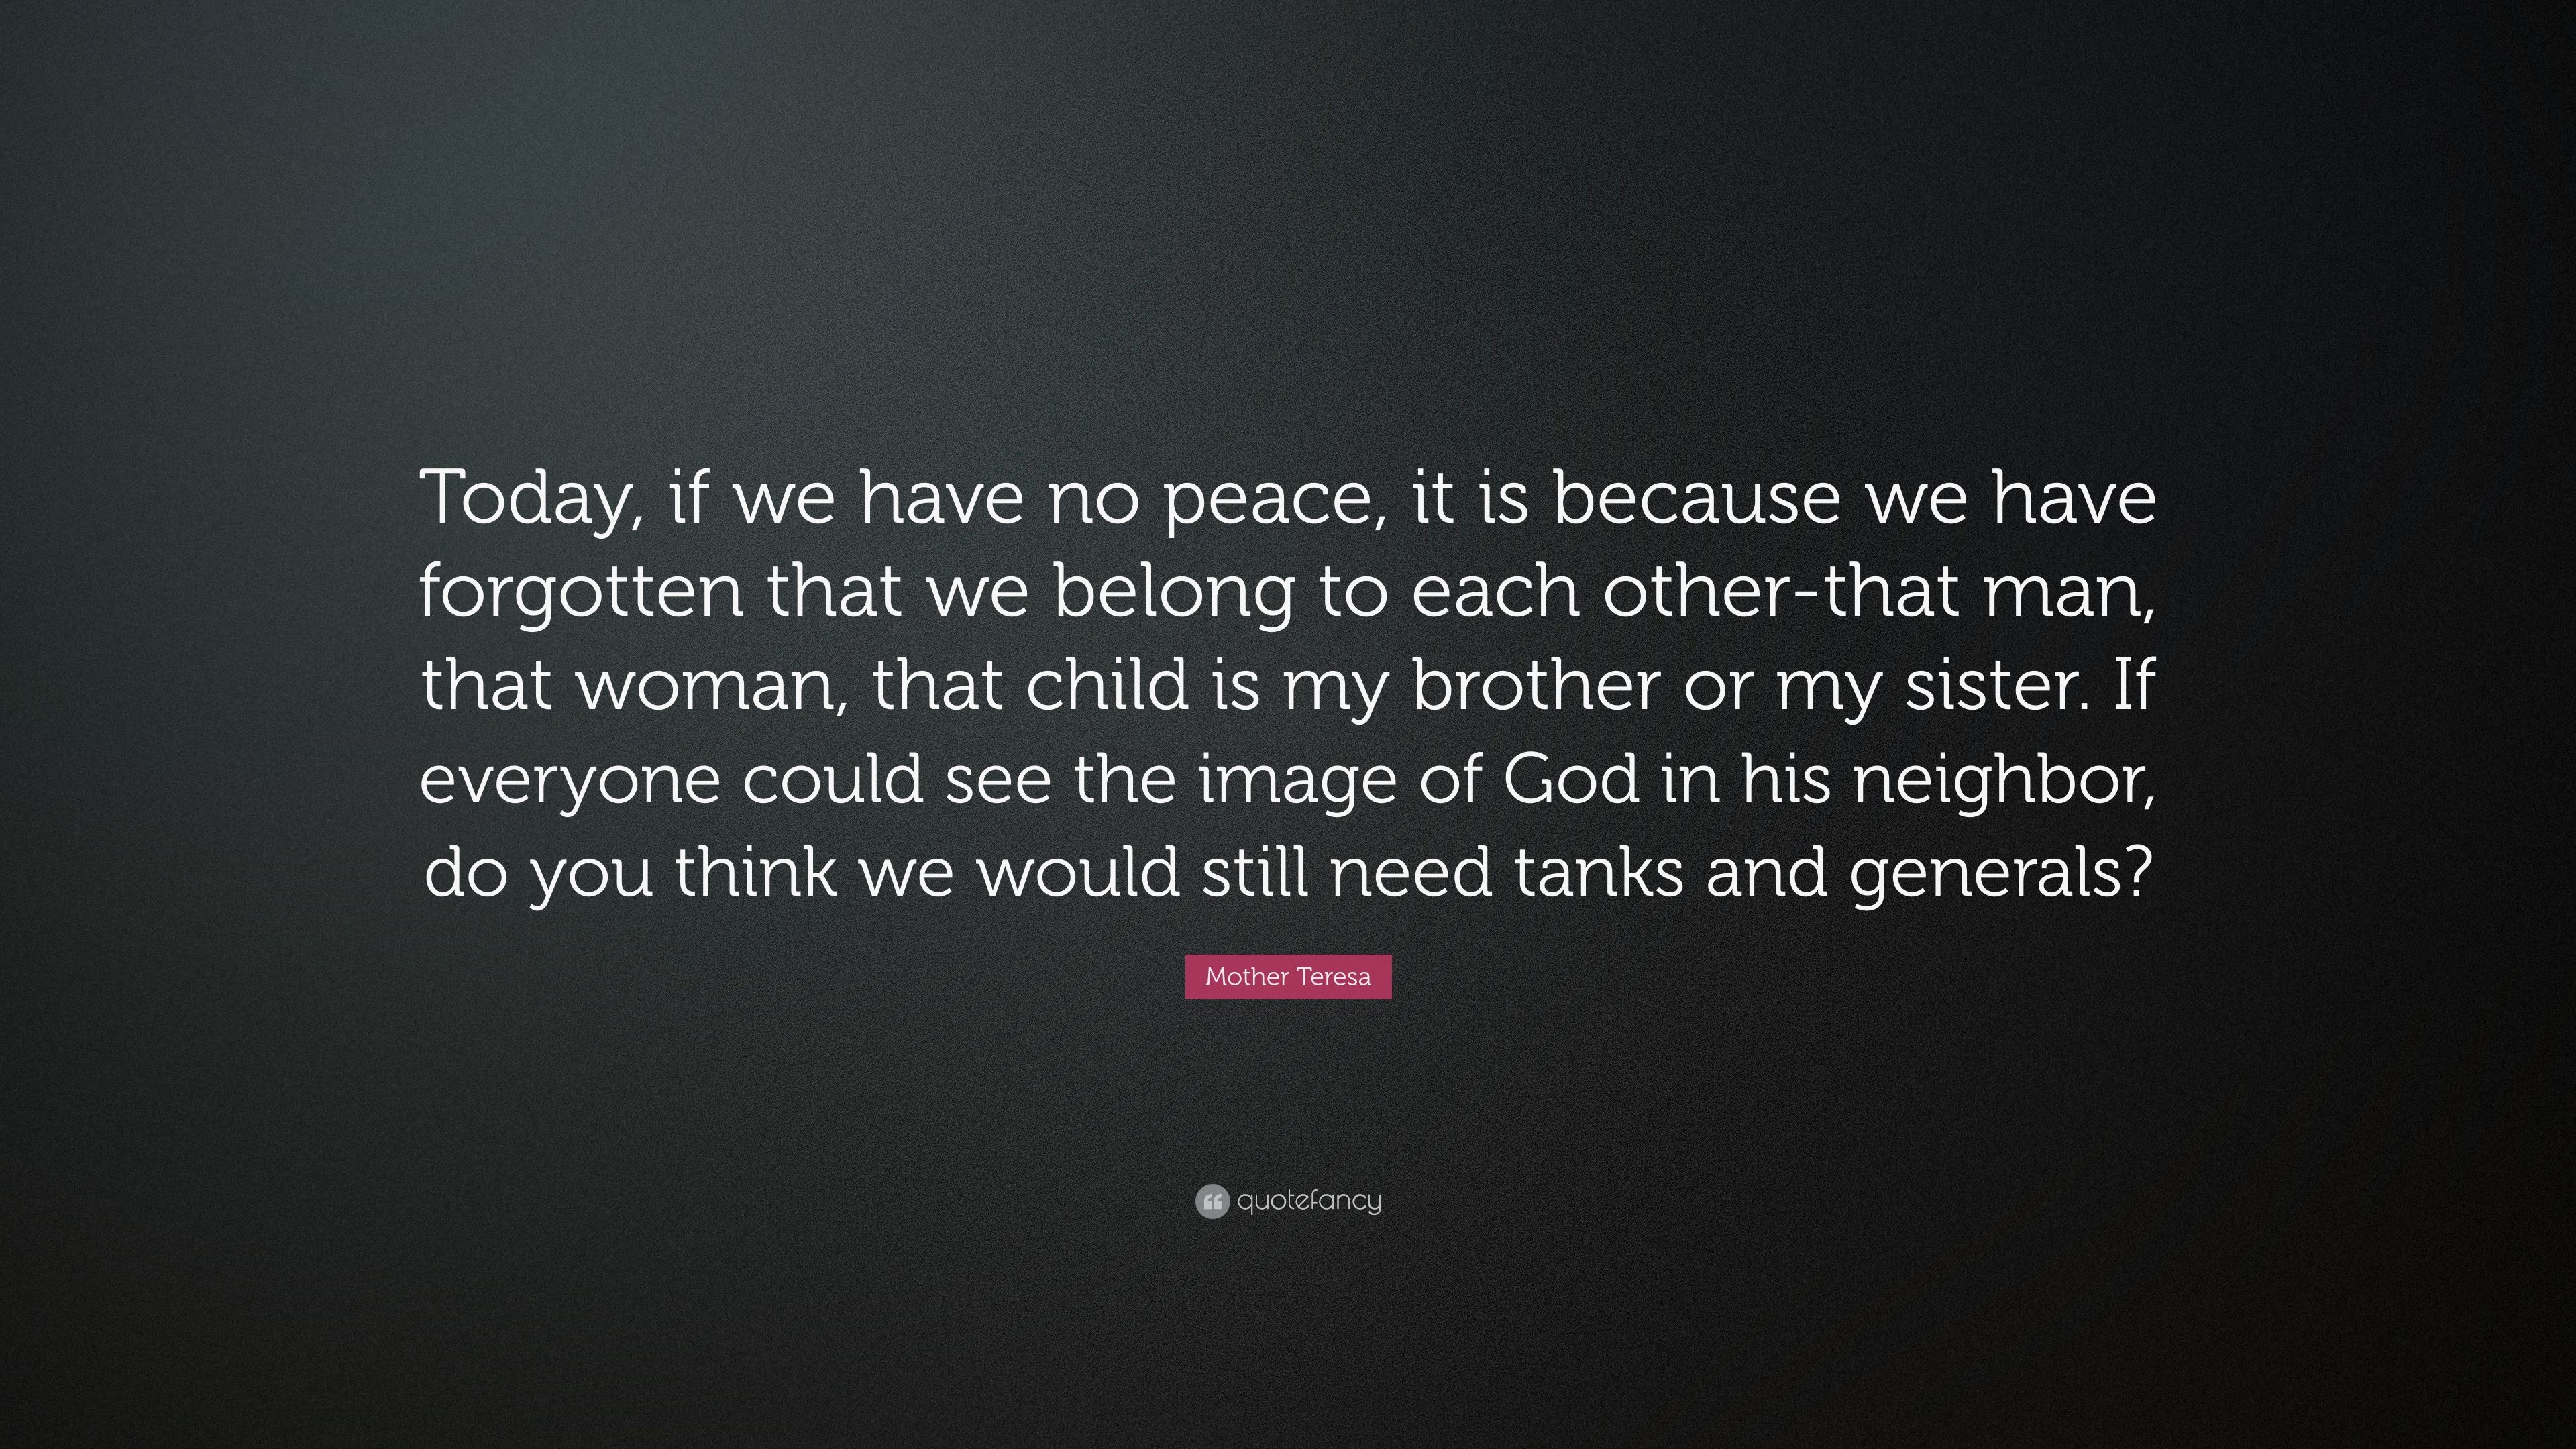 Mother teresa quote âtoday if we have no peace it is because we have forgotten that we belong to each other